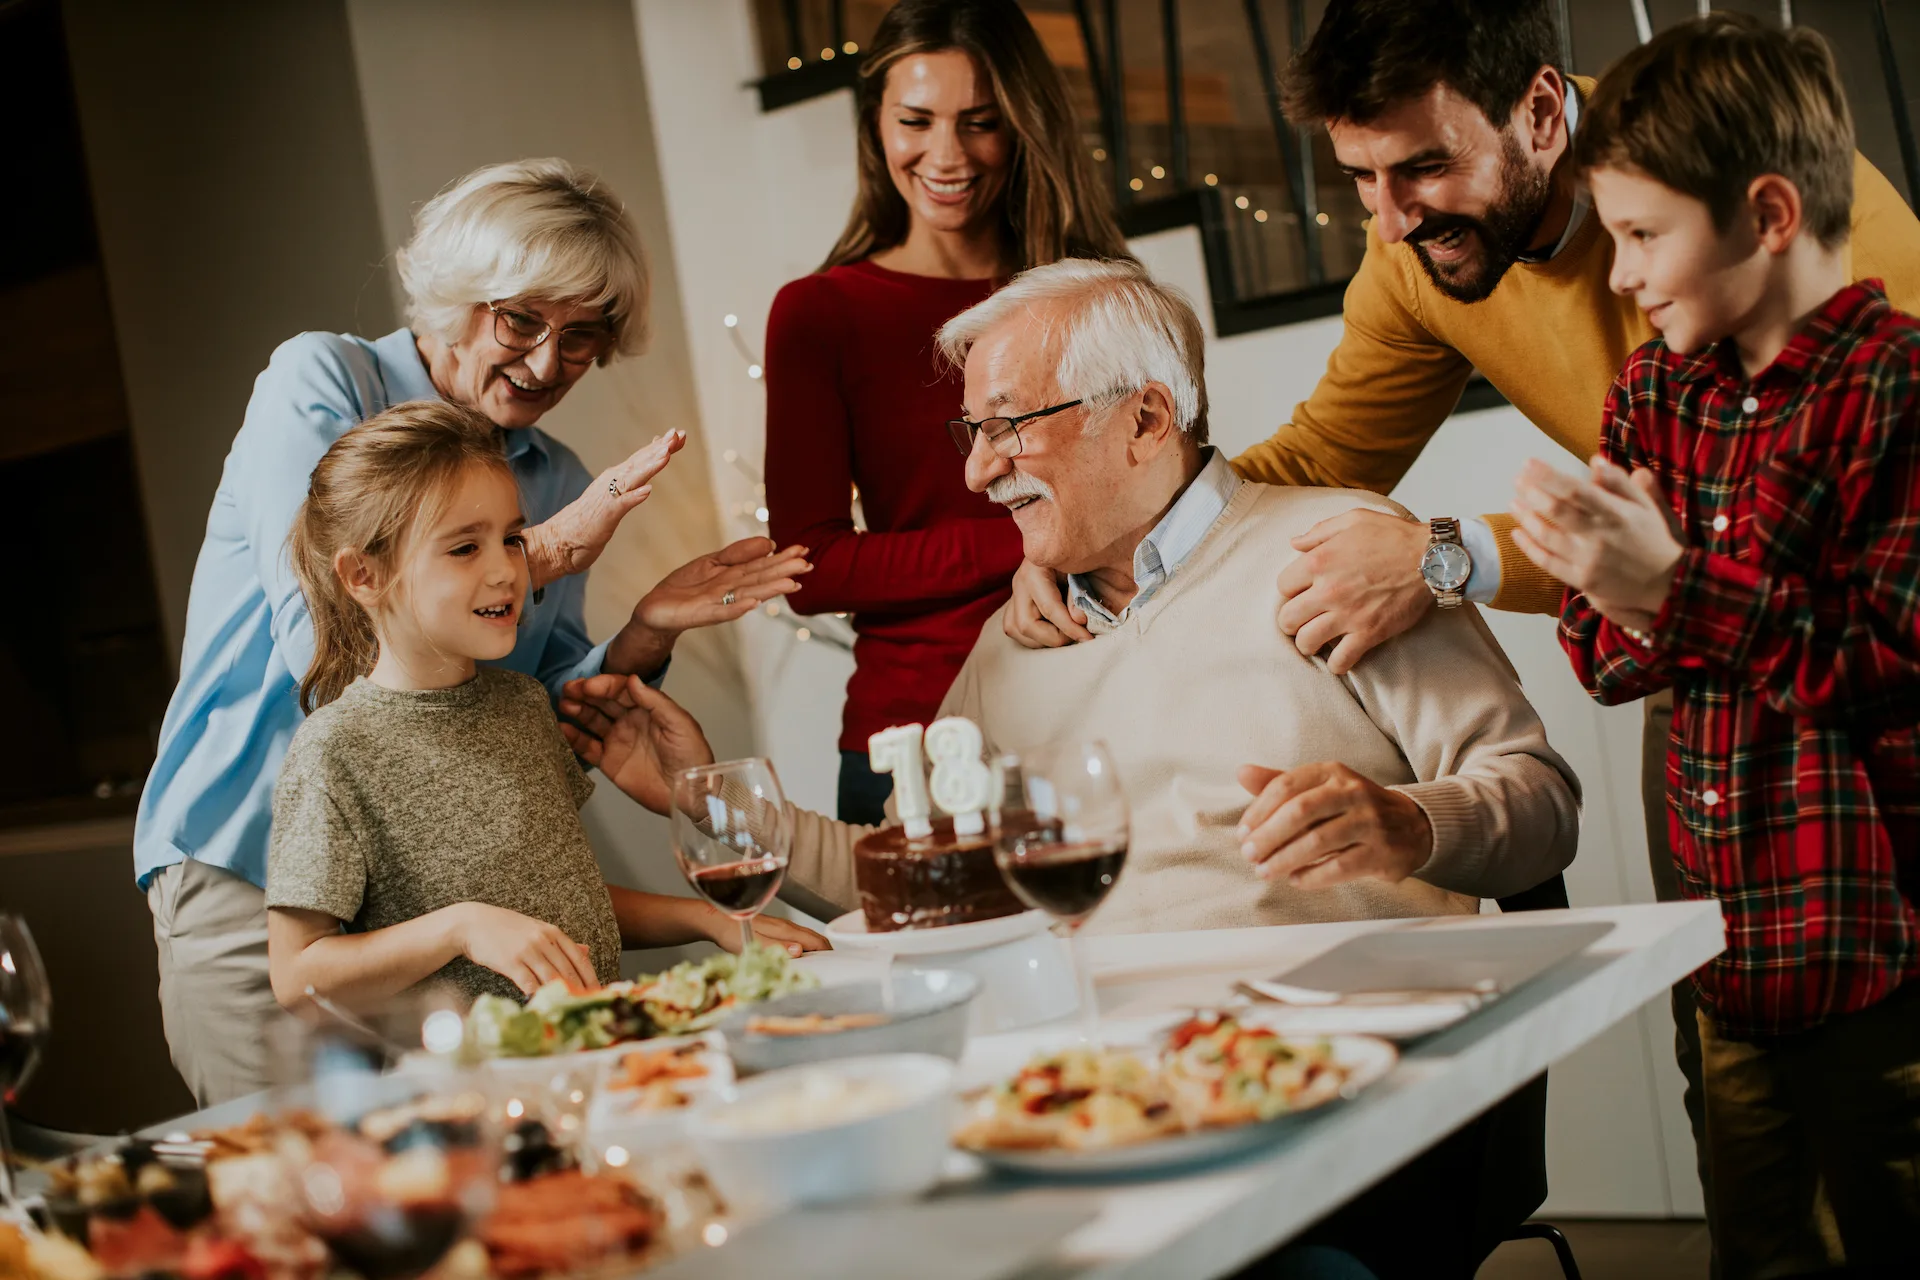 A multi-generational family enjoys a meal together, laughing and interacting joyfully around a dining table. This gathering highlights the industry of home-cooked meals that brings families together.